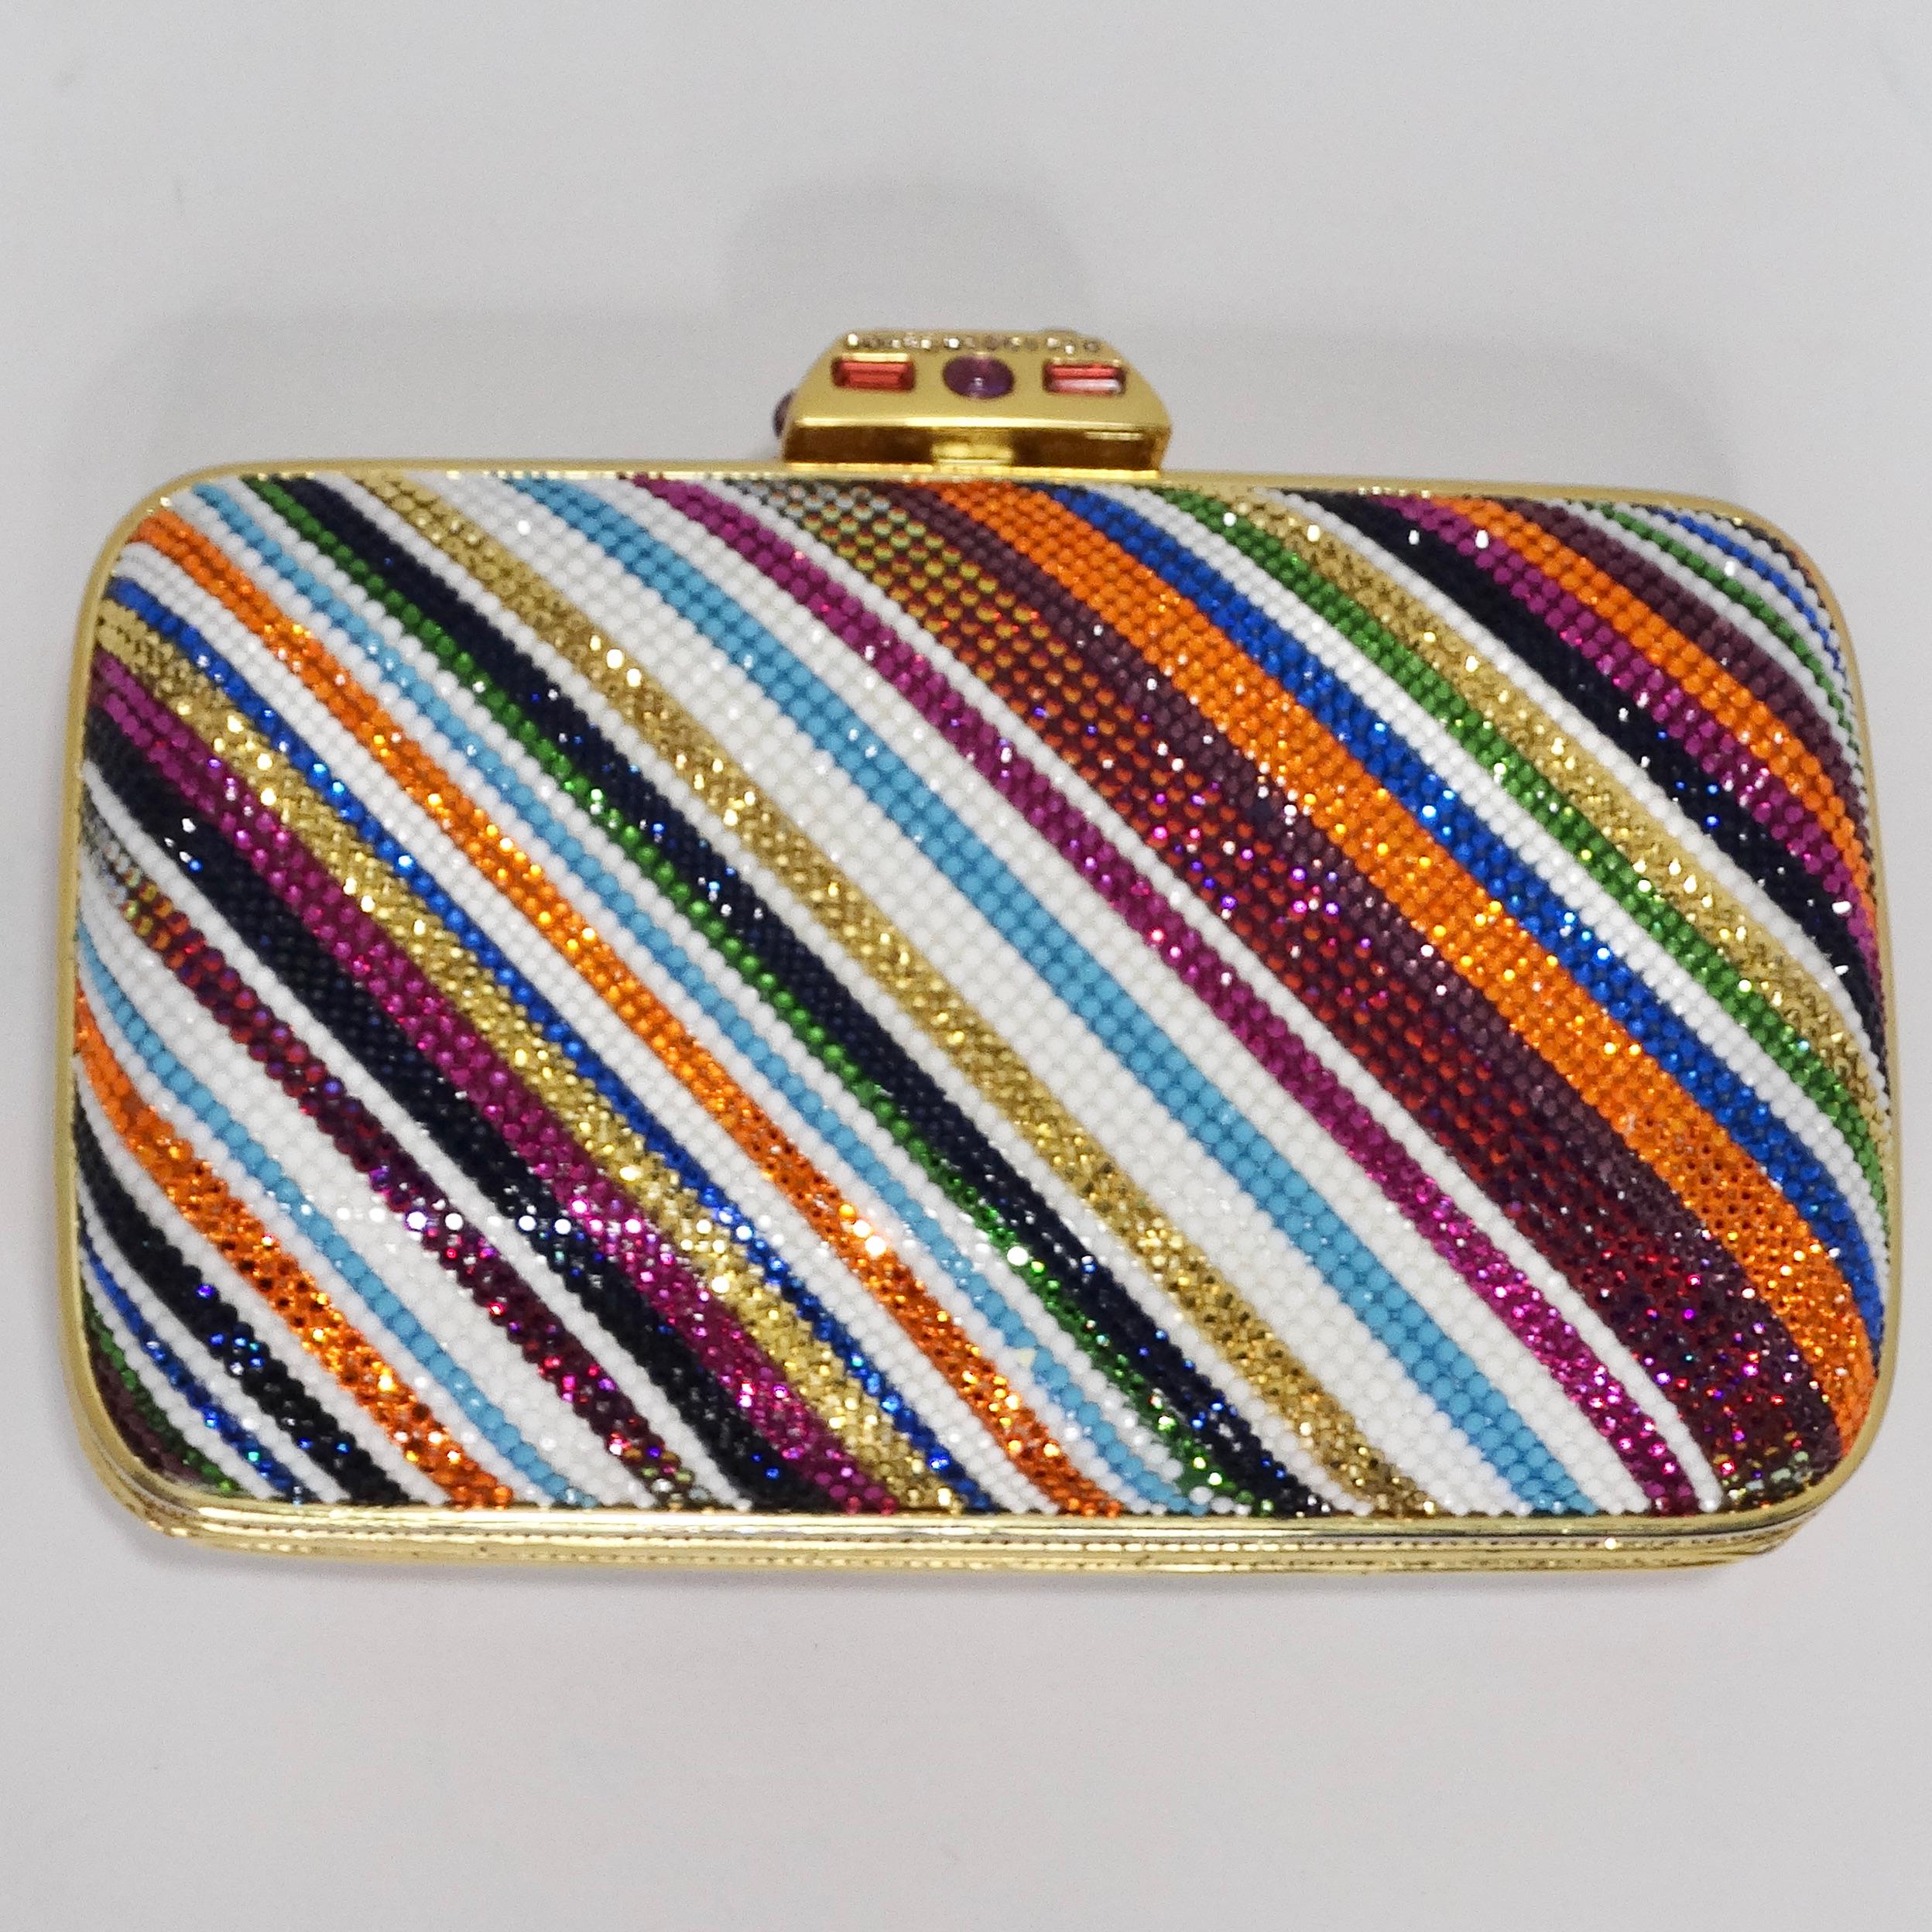 Elevate your accessory game with the mesmerizing Judith Leiber Rainbow Swarovski Crystal Clutch. This iconic piece is a dazzling work of art that's bound to steal the spotlight. Crafted to perfection, the clutch is adorned with a vibrant array of